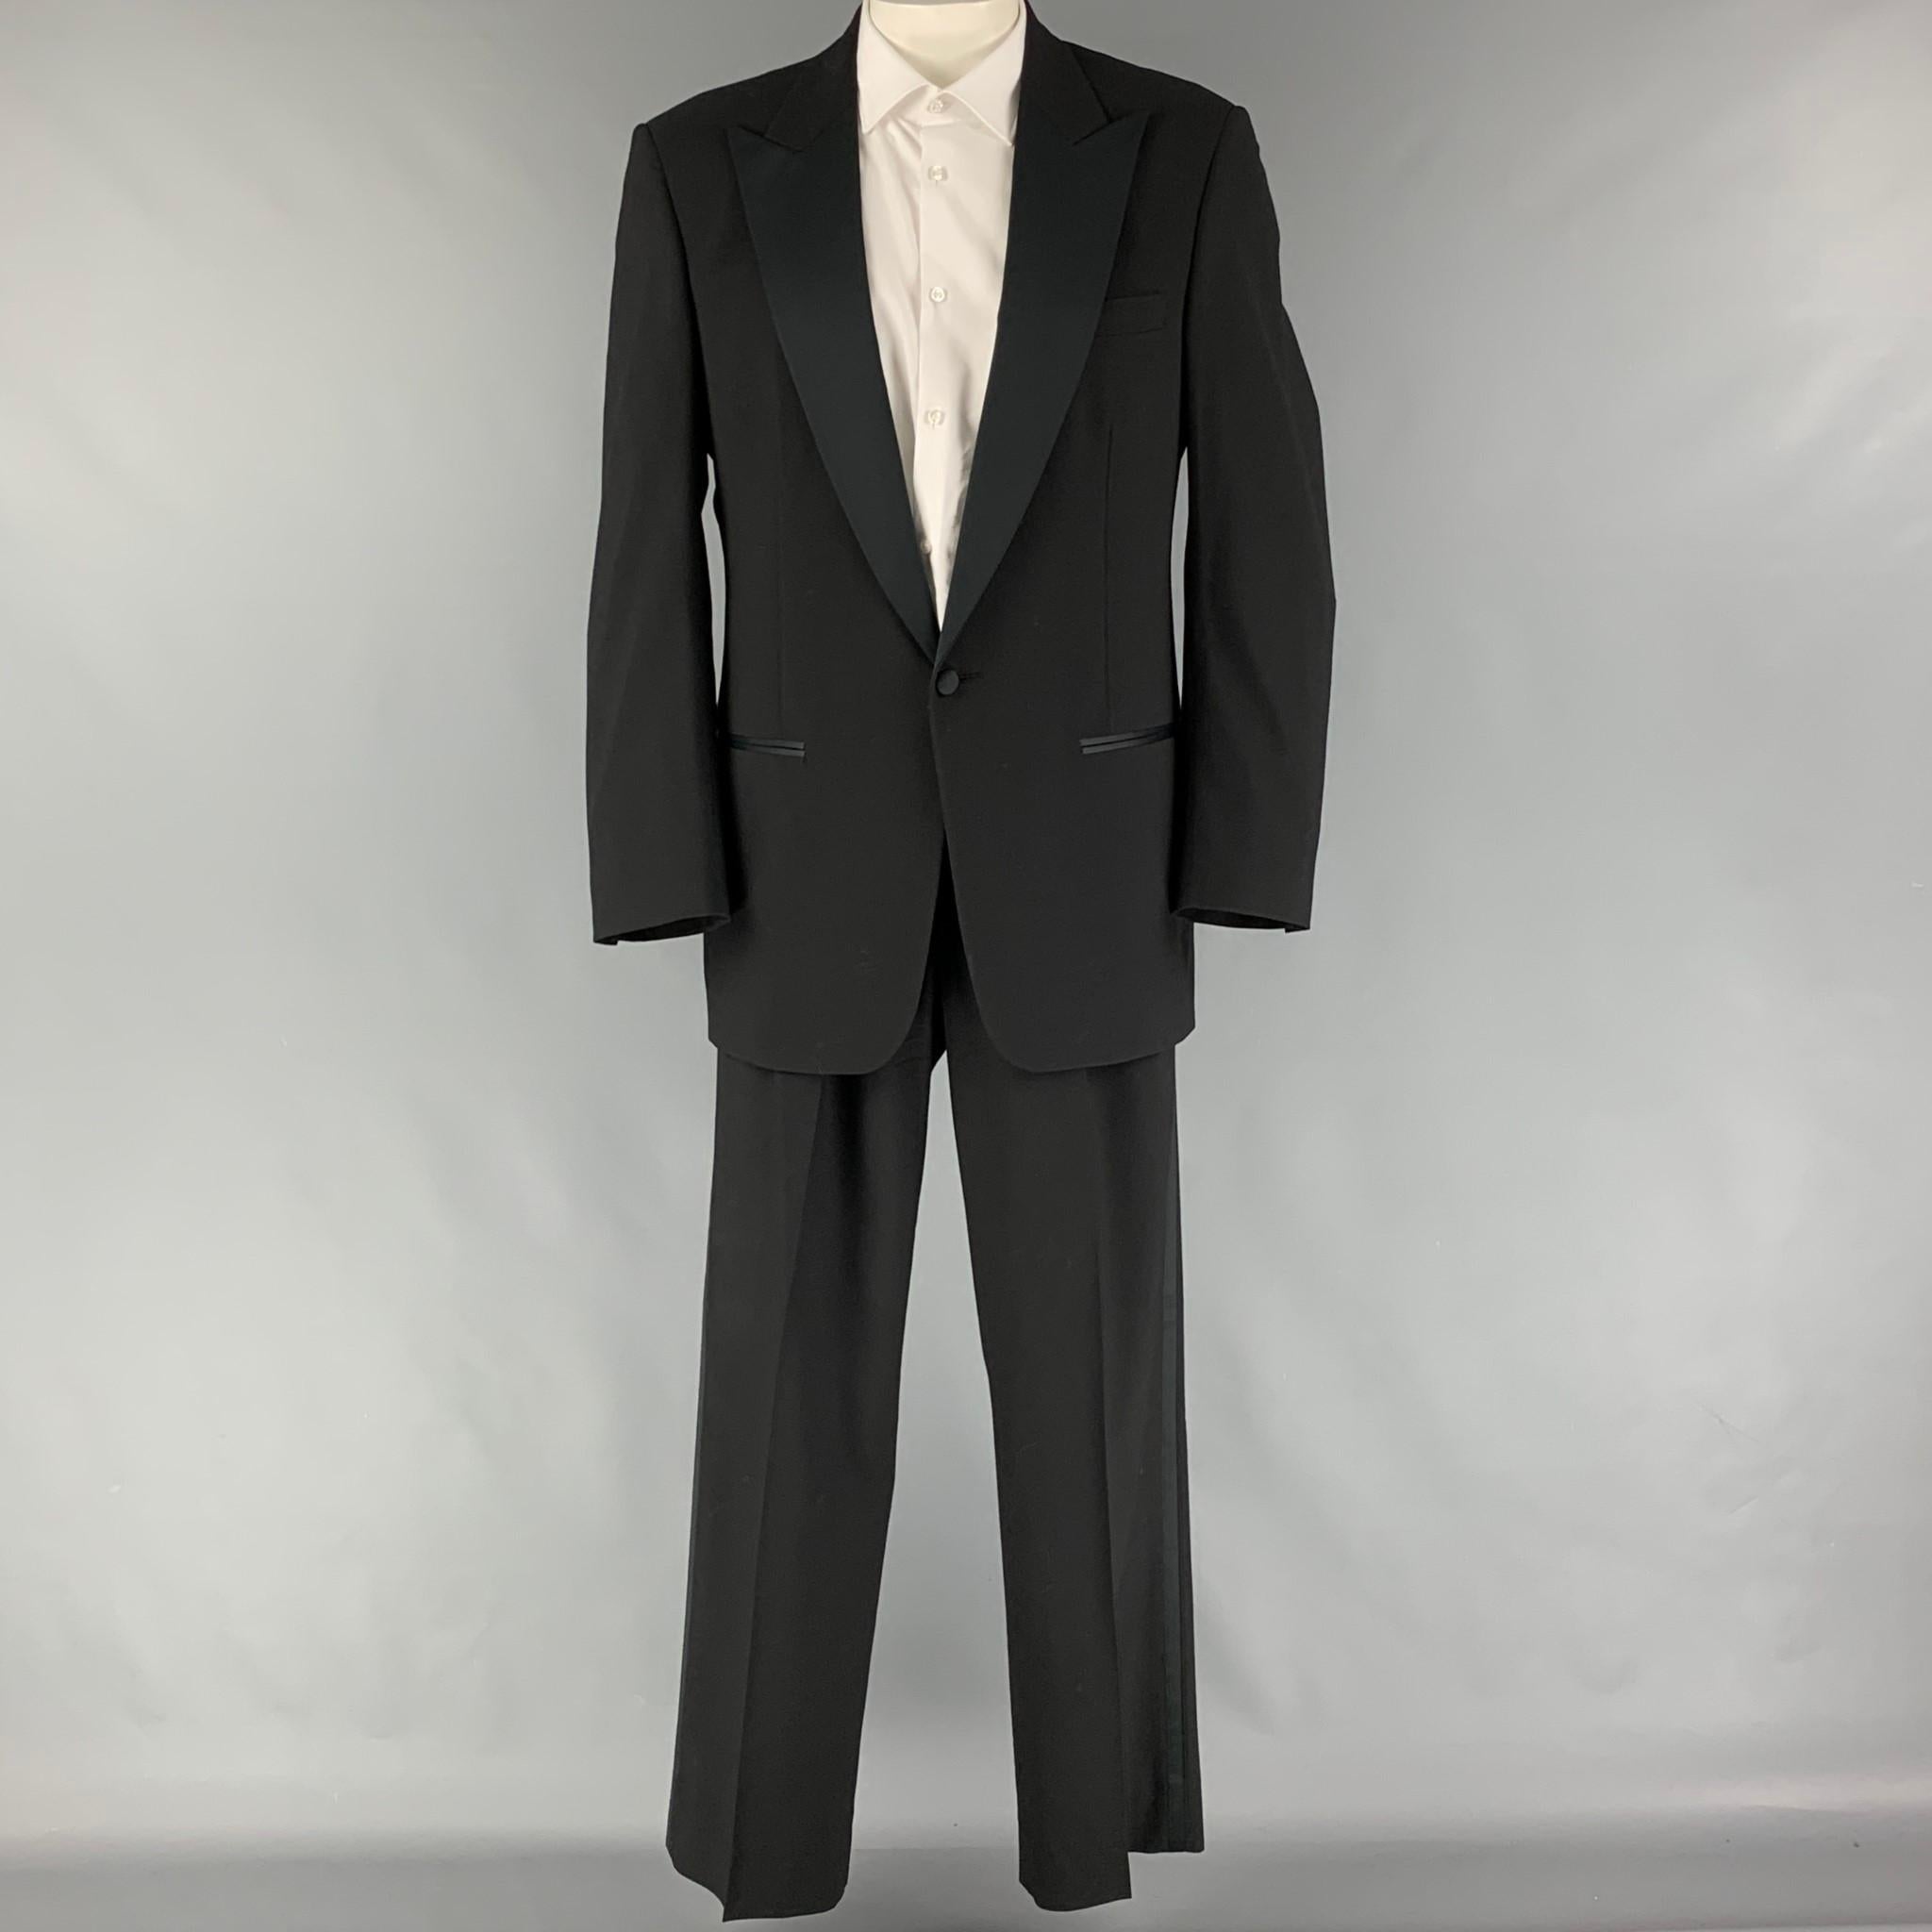 Vintage CHRISTIAN DIOR suit comes in a black virgin wool with a full liner and includes a single breasted, single button sport coat with a peak lapel and matching pleated front trousers.

Good Pre-Owned Condition.
Marked: 41